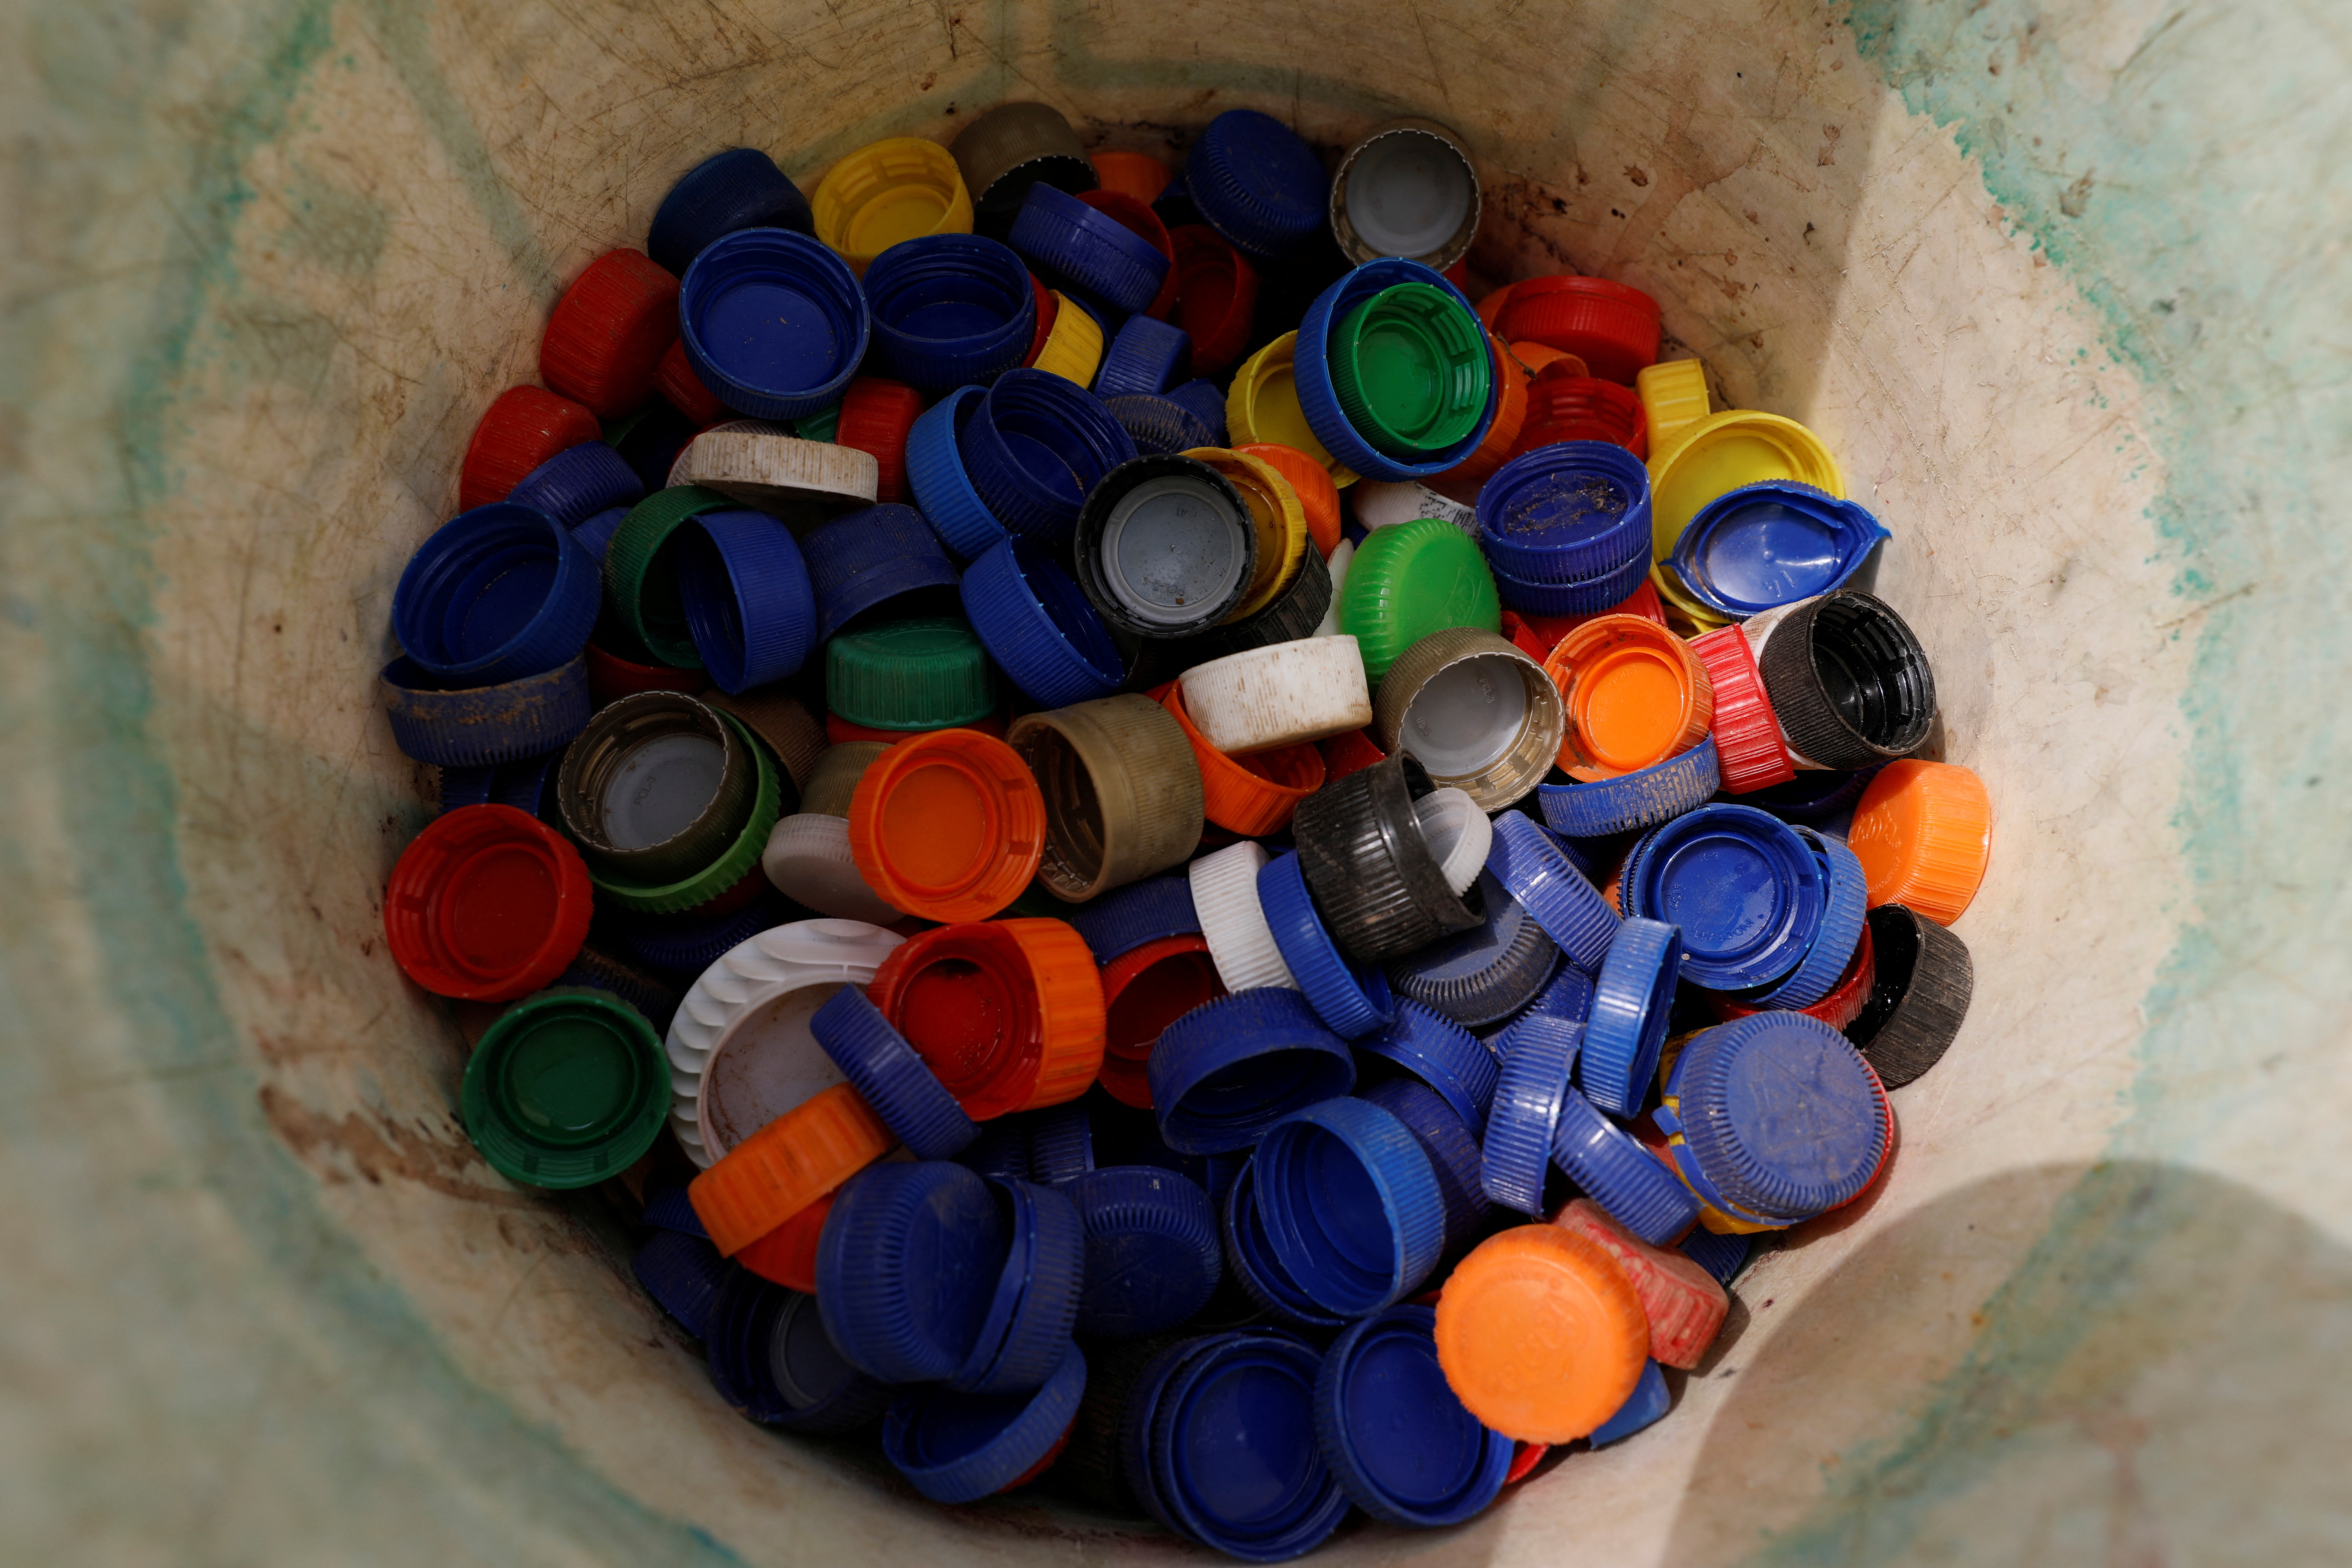 Caps collected from used plastic bottles are stored in a bucket at the Waste museum in Ibadan